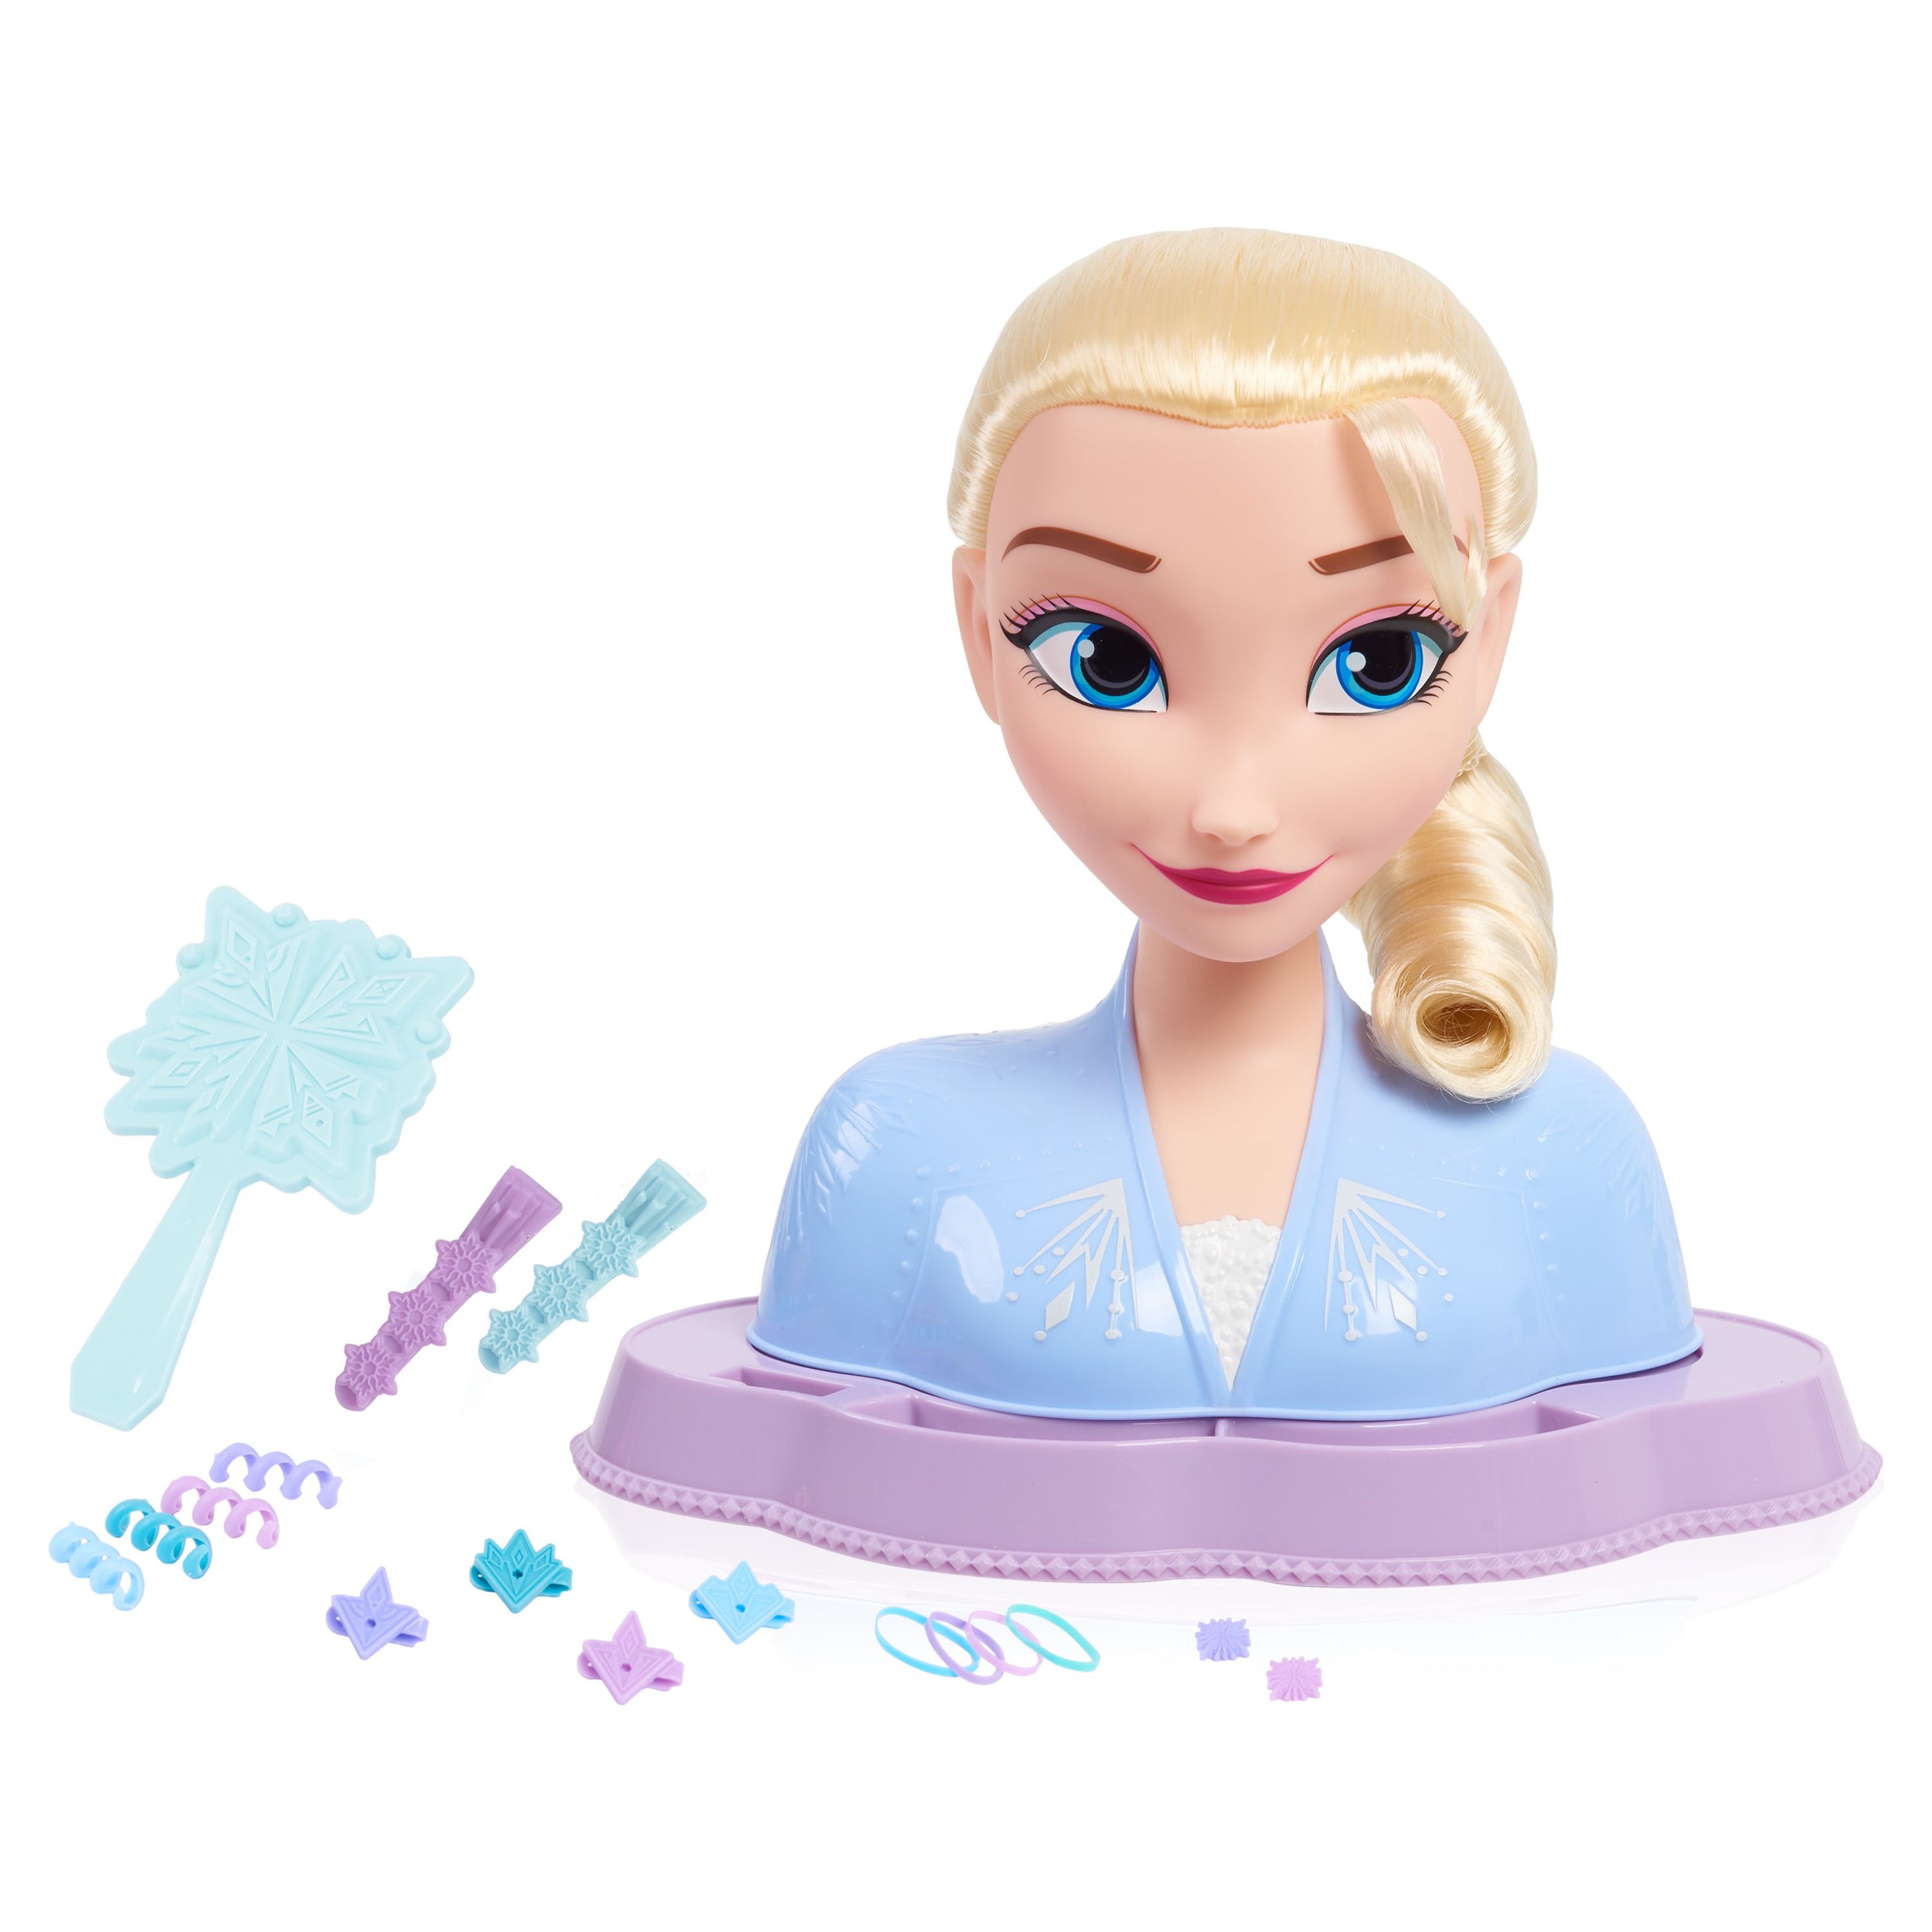 Disney Frozen Elsa Styling Head, Blonde Hair, 14 Piece Pretend Play Set, Wear and Share Accessories, Officially Licensed Kids Toys for Ages 3 Up, Gifts and Presents - image 1 of 2